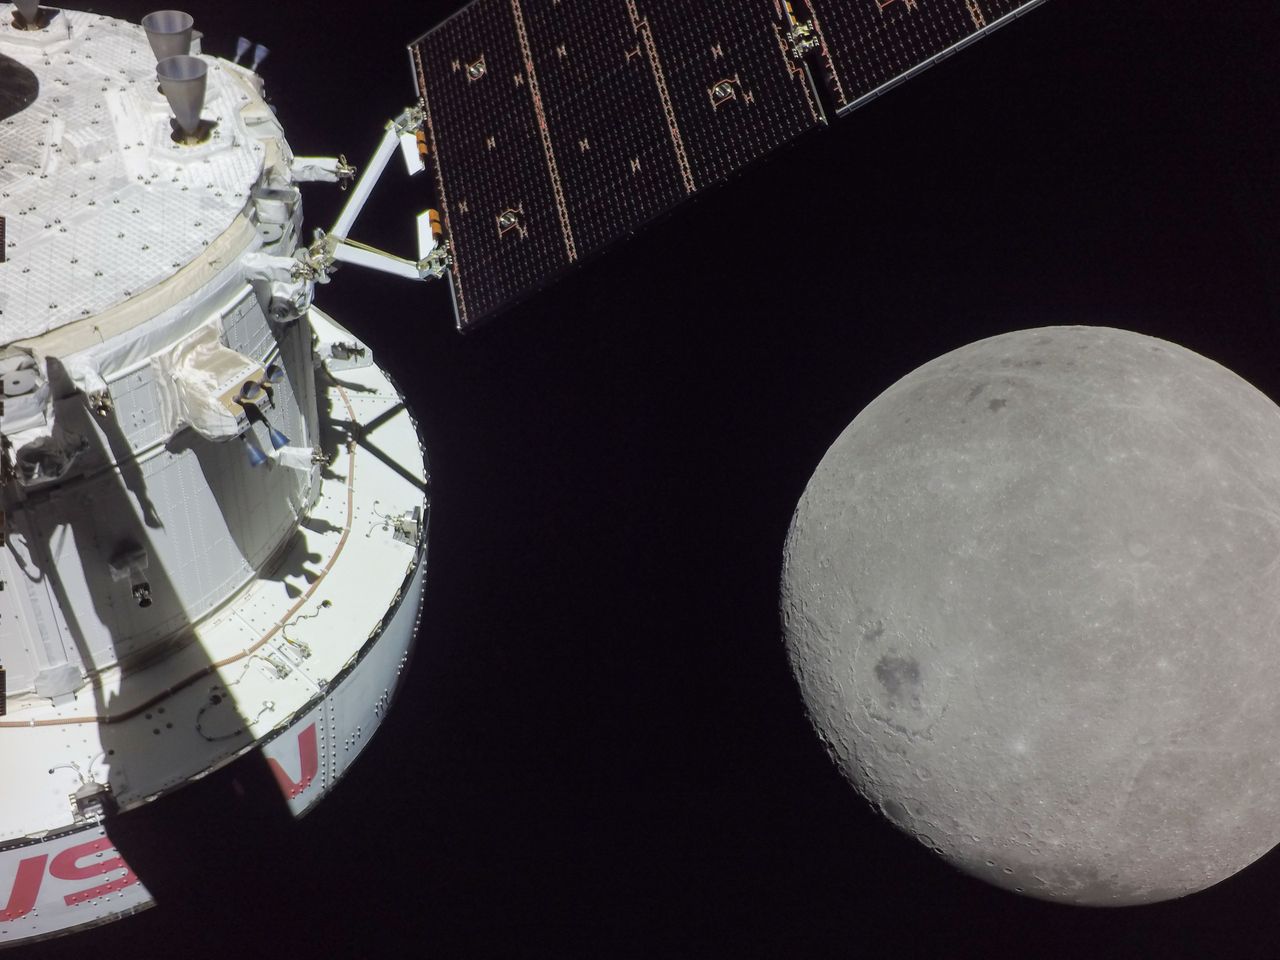 A portion of the far side of the moon looms large just beyond the Orion spacecraft in this image released Nov. 21, 2022, of the Artemis I mission. The darkest spot visible near the middle of the image is Mare Orientale.